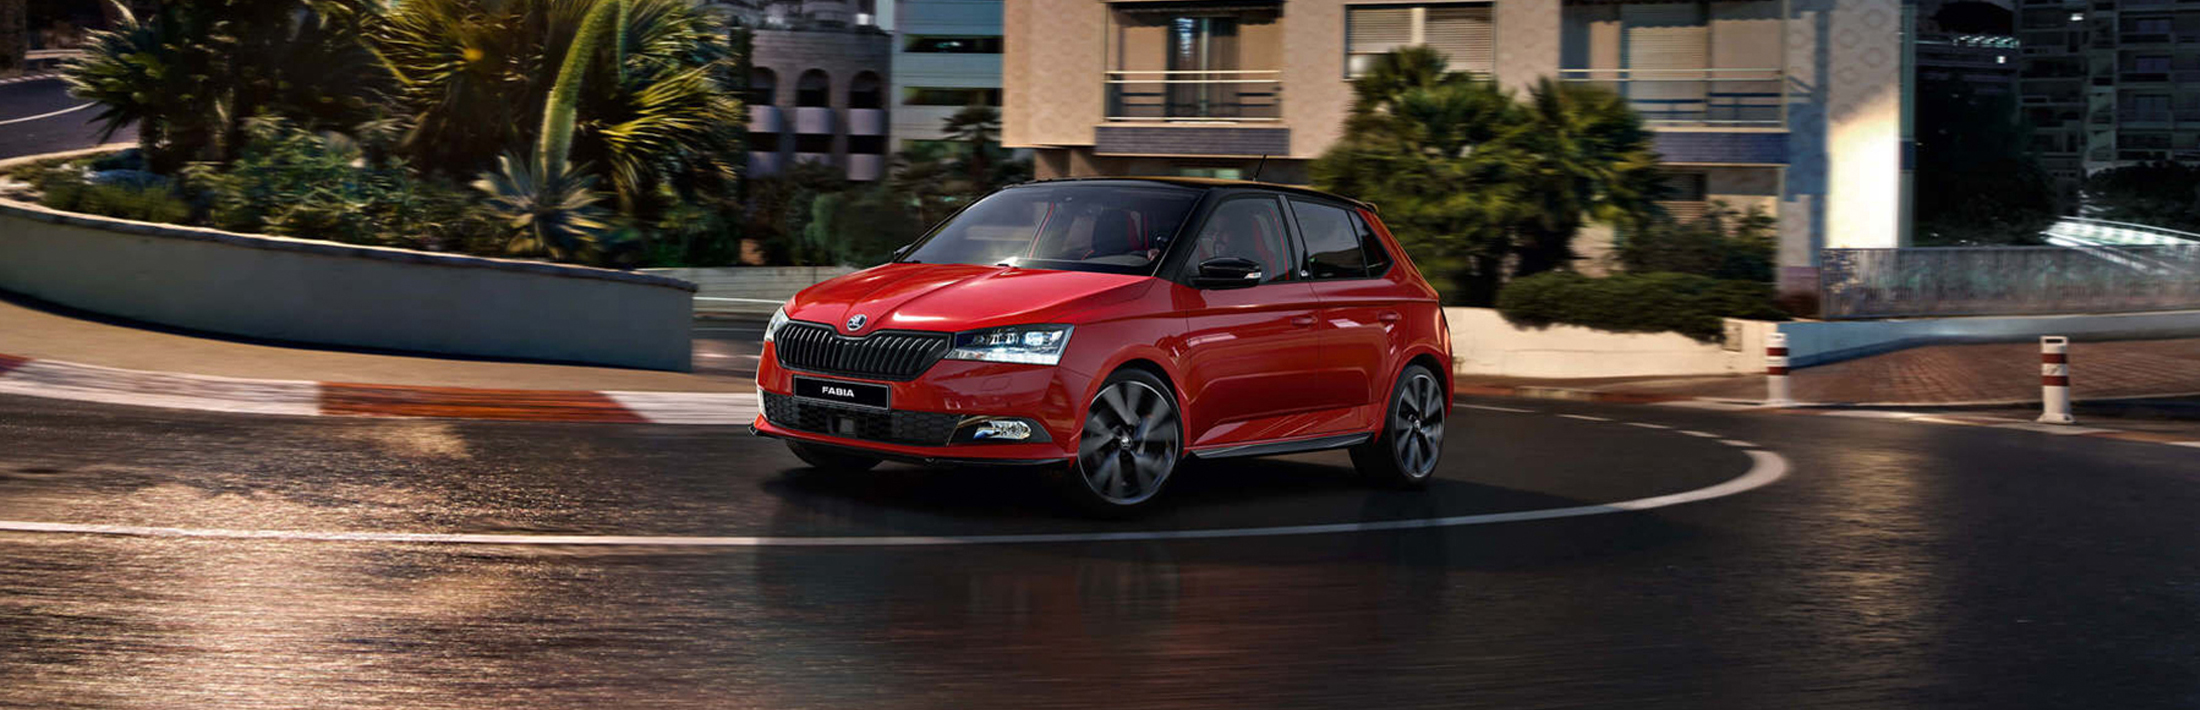 Red Fabia